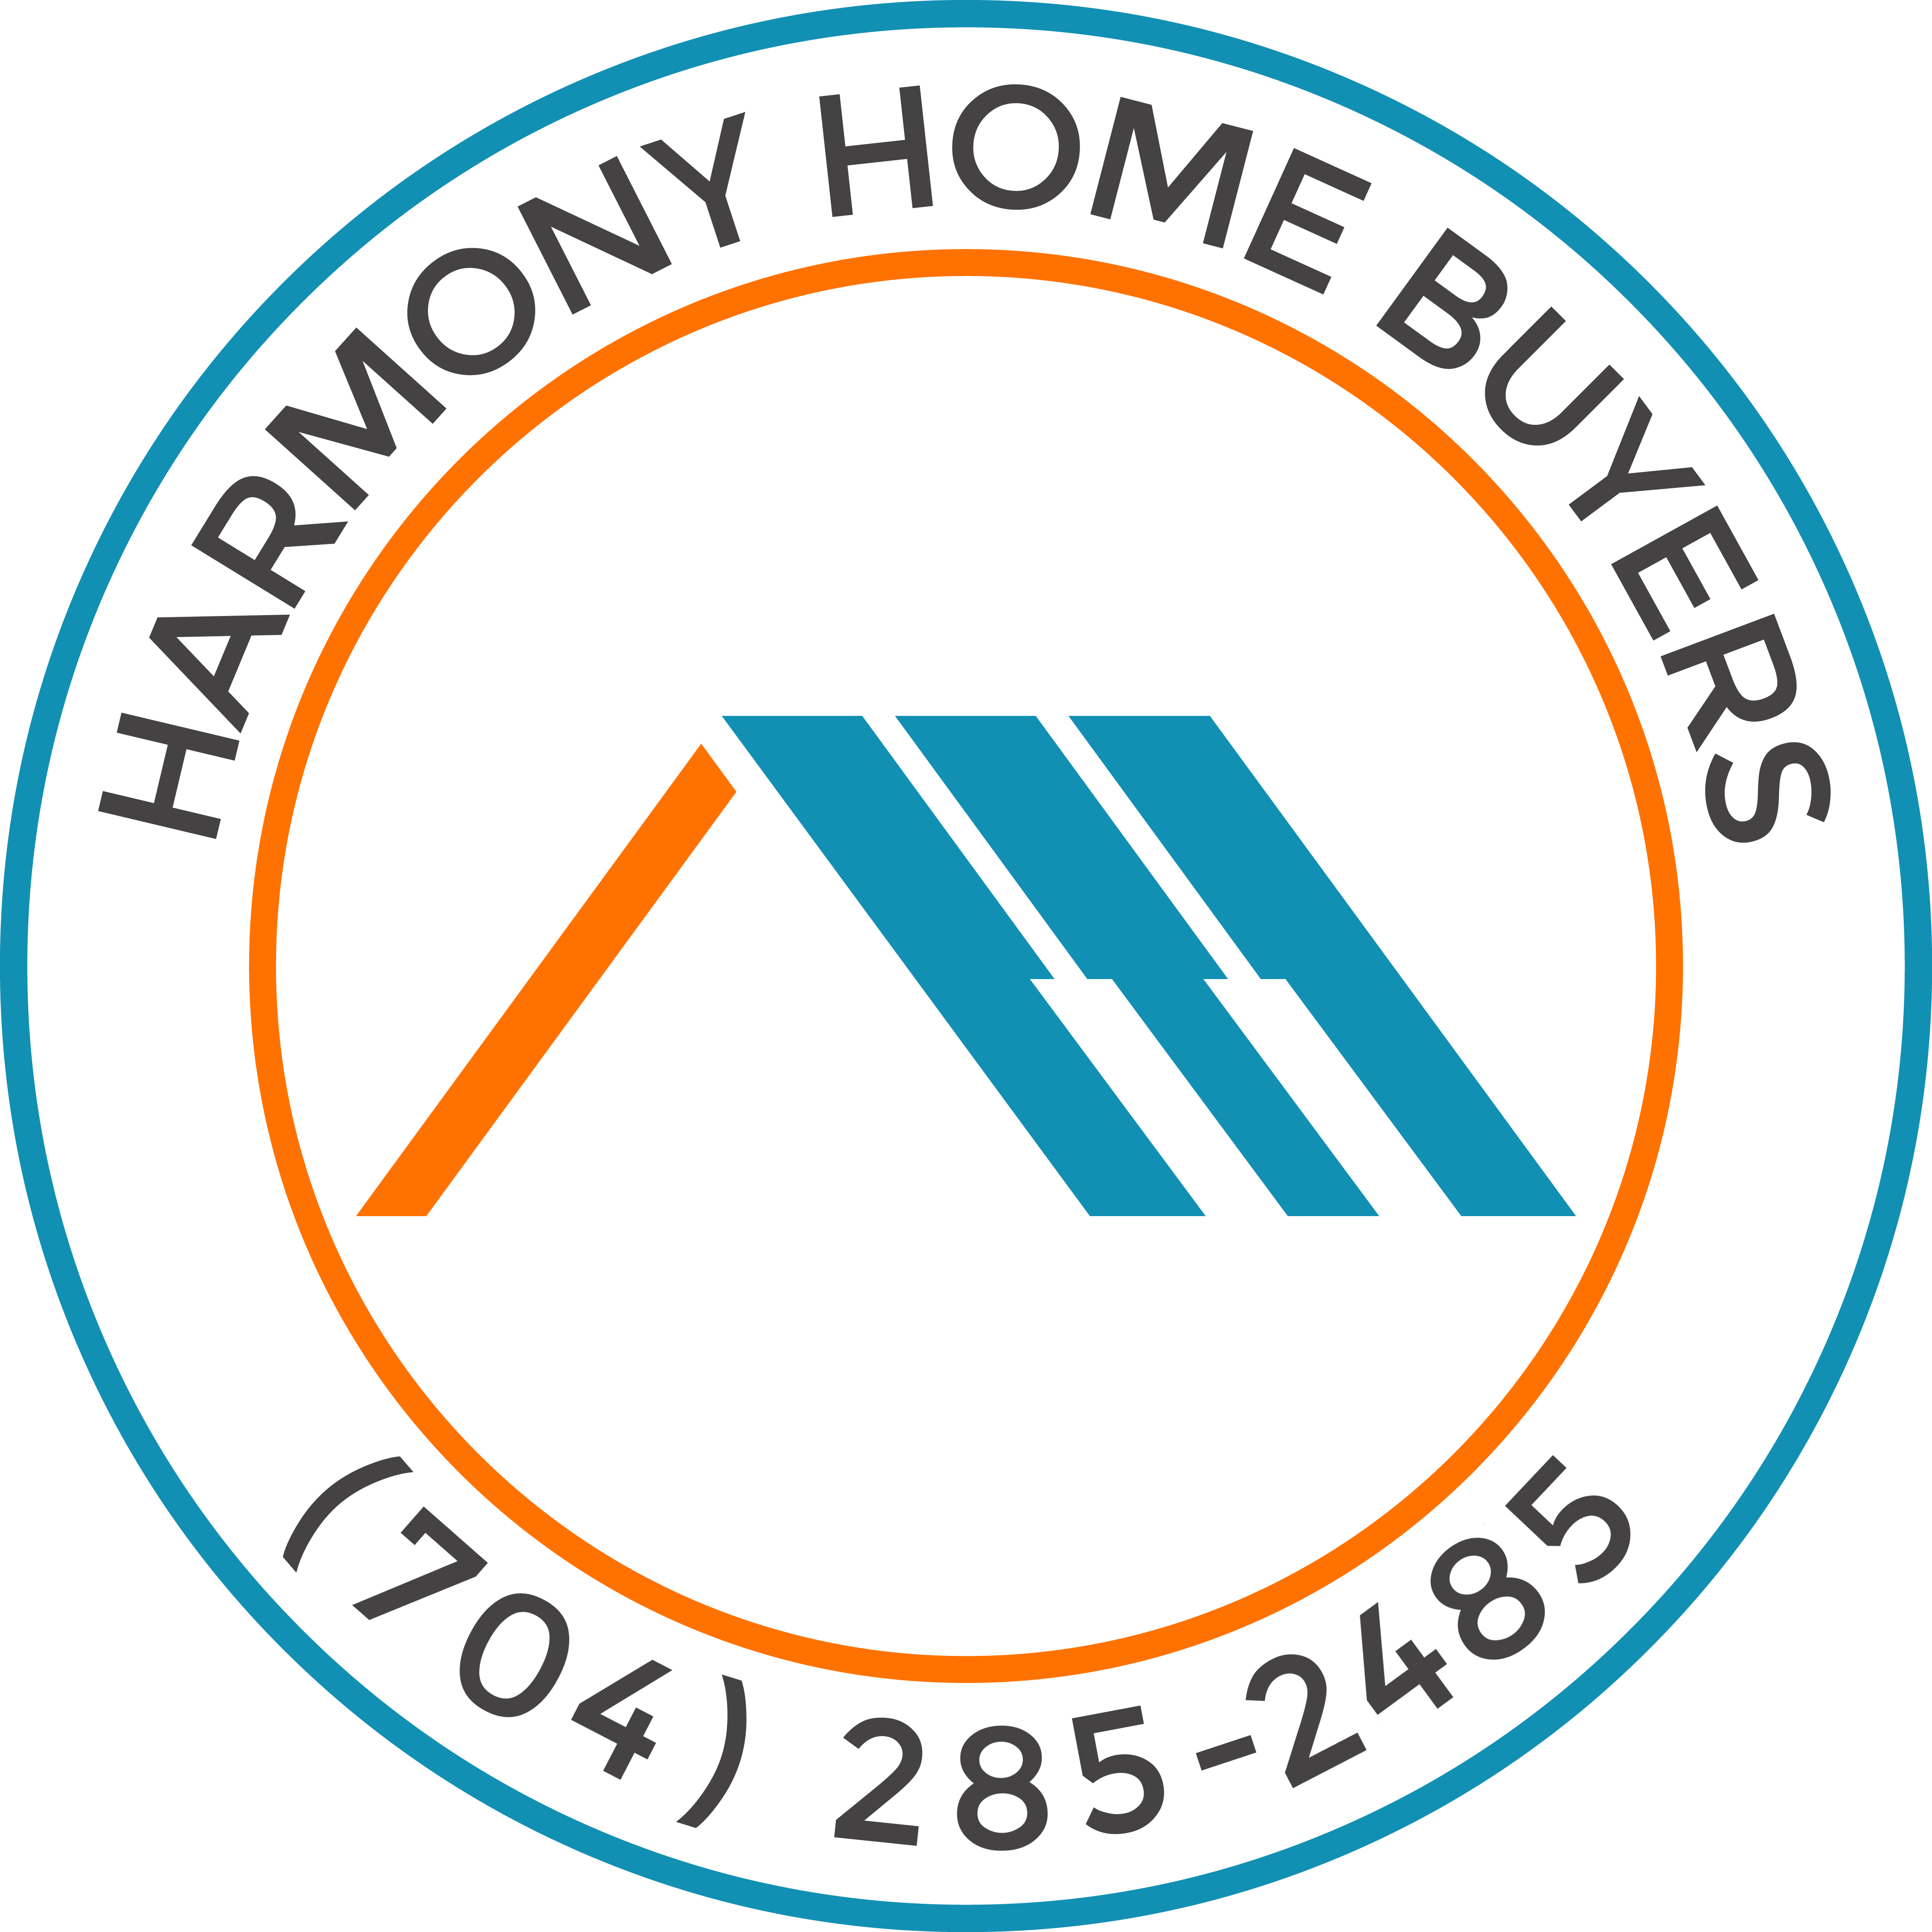 The Benefits to Selling Homes with Harmony Home Buyers